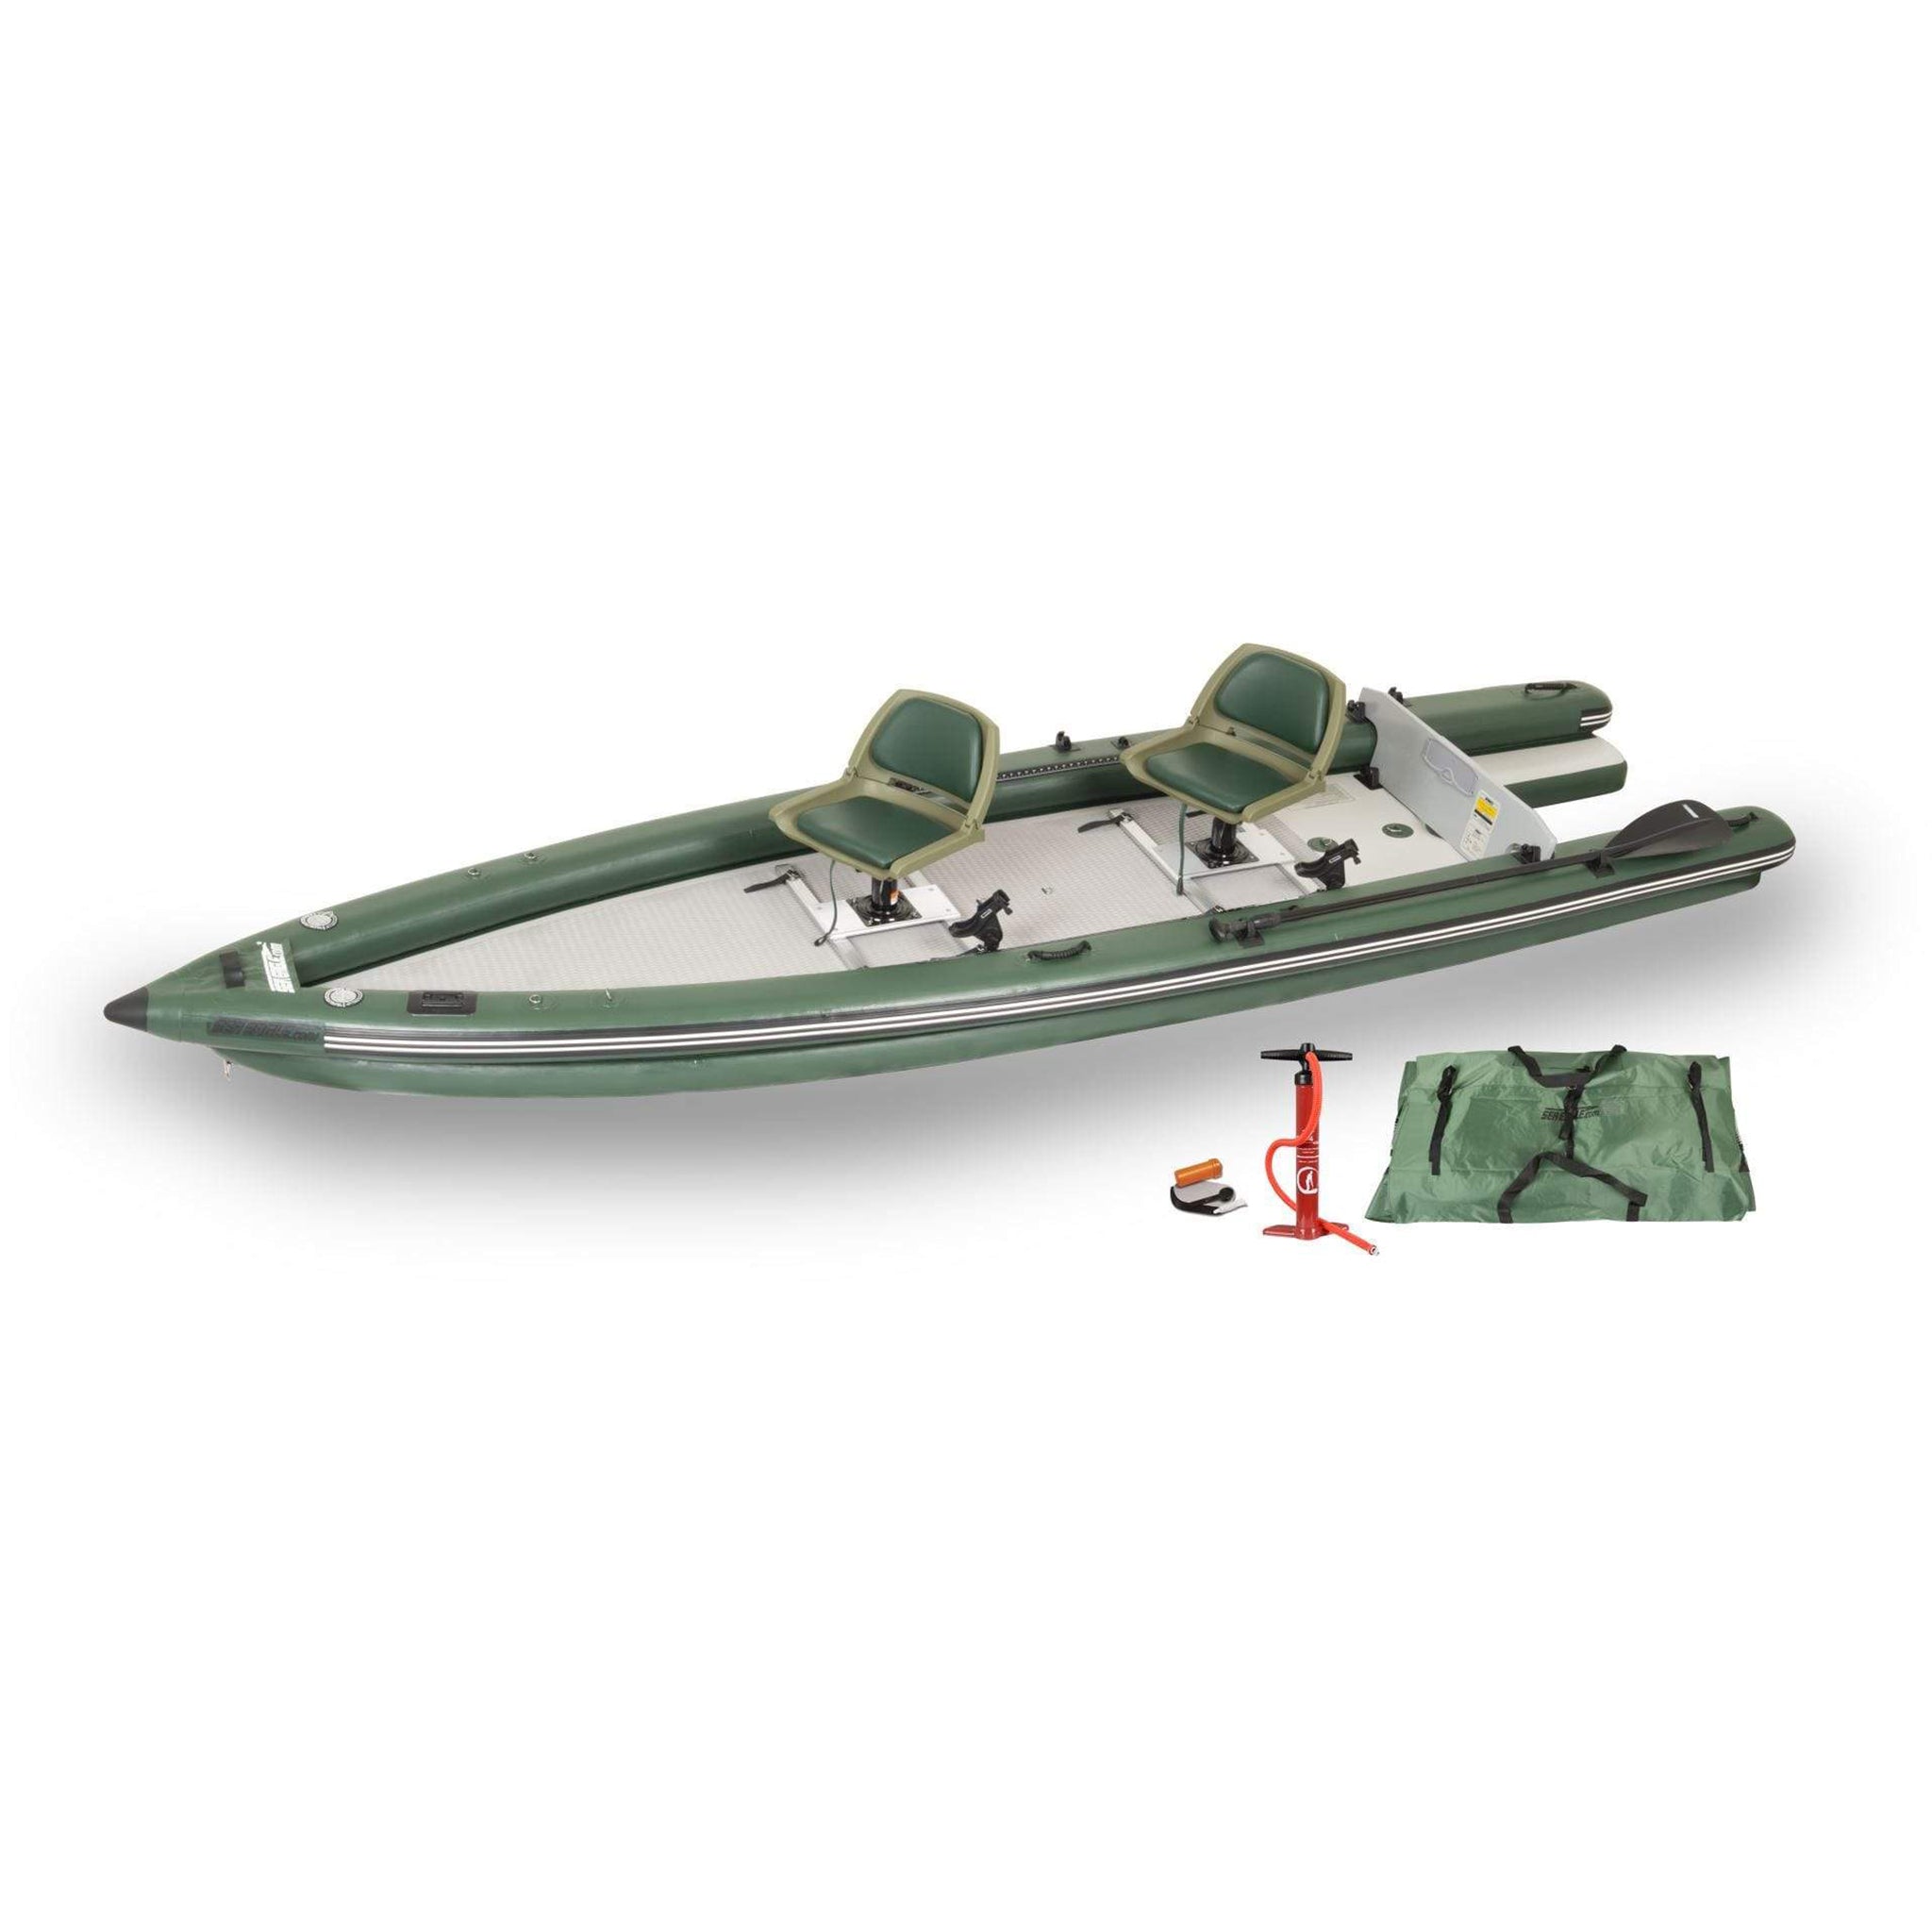 A swivel seat on a fishing kayak? That's right! The benefits of a